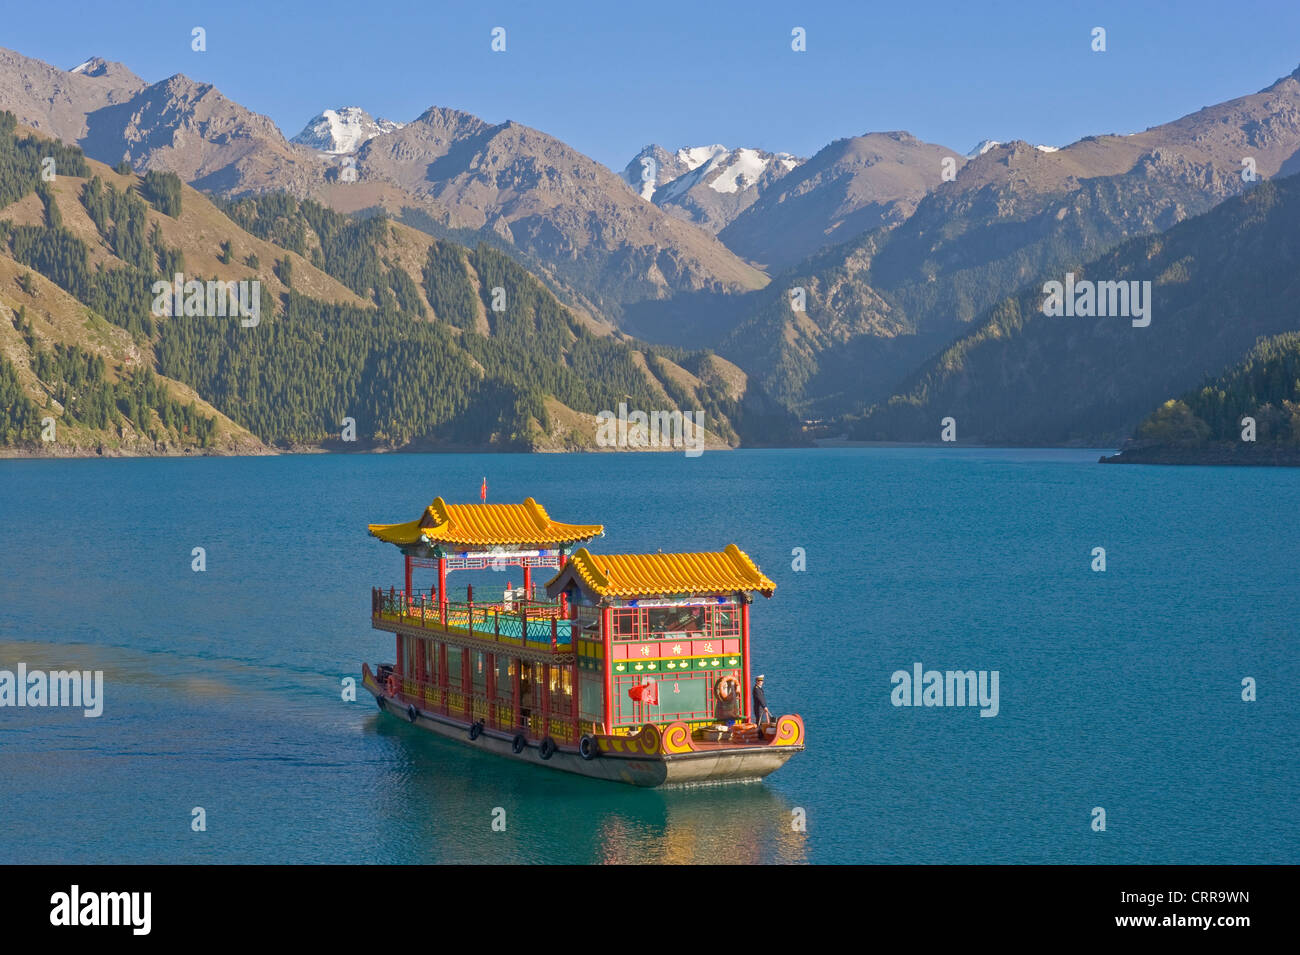 A traditional style tourist boat at the Chinese alpine beauty spot of Heavenly Lake. Stock Photo